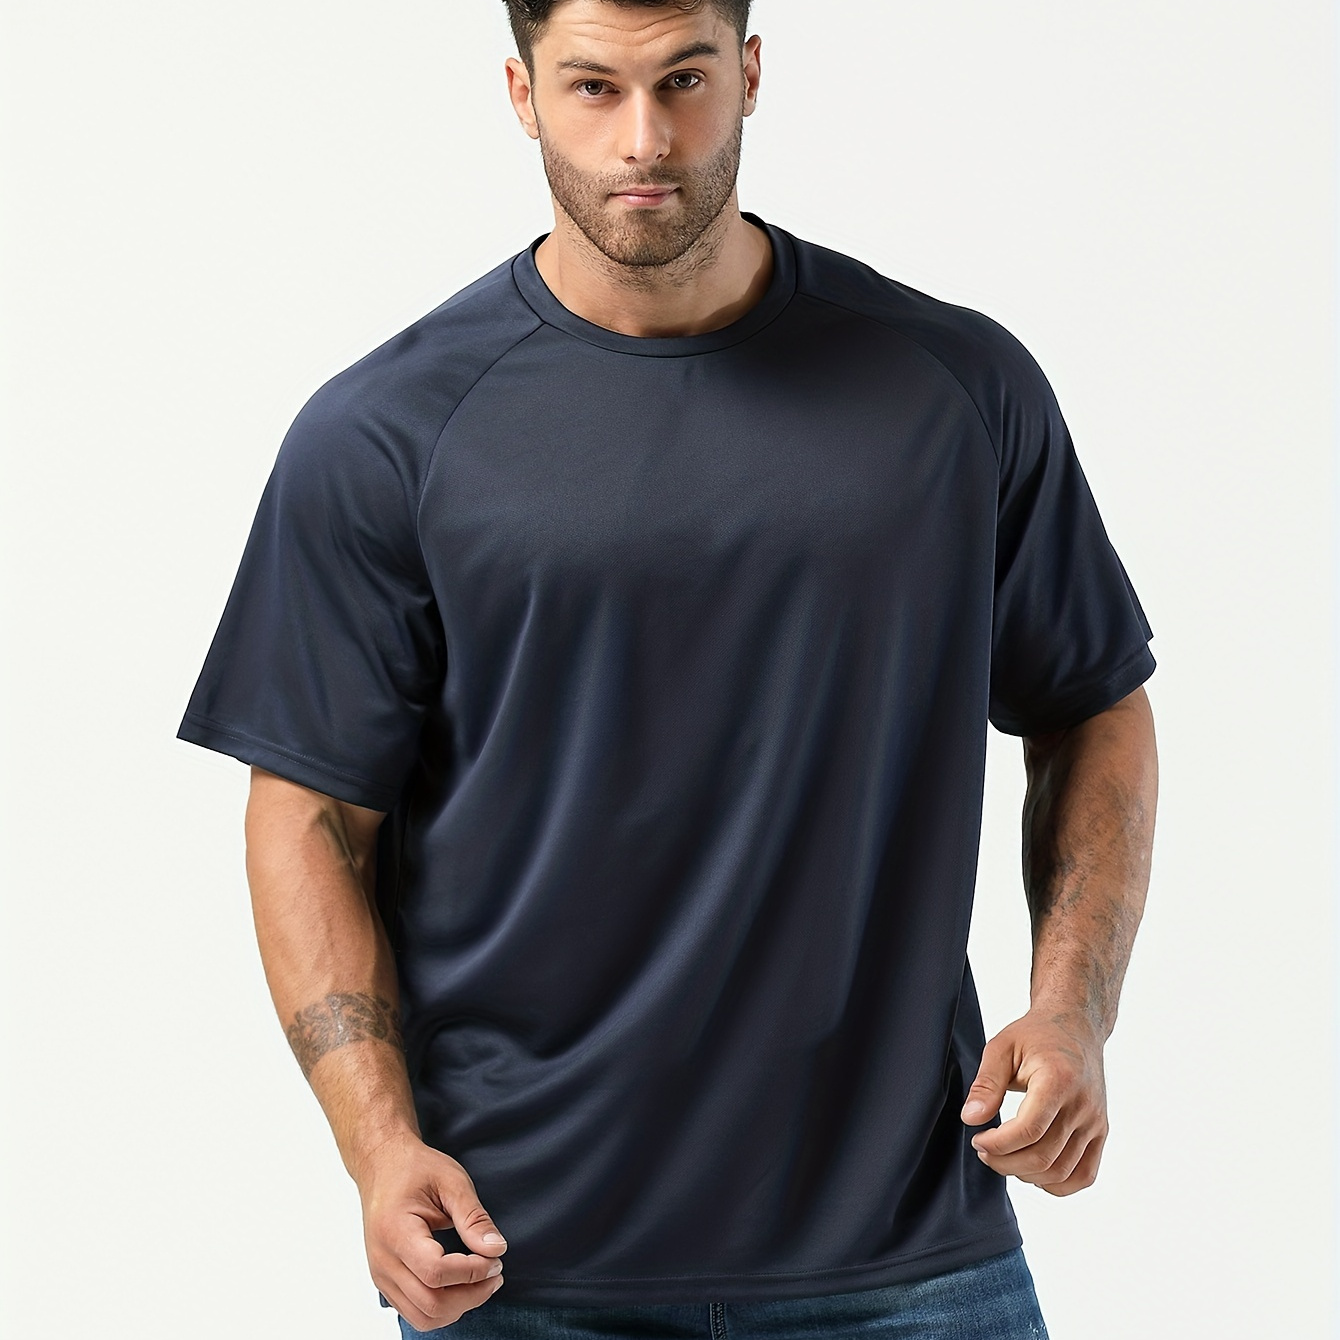 

Plus Size Men's Solid T-shirt Sports Casual Short Sleeve Tees For Summer, Undershirts Tops, Men's Clothing